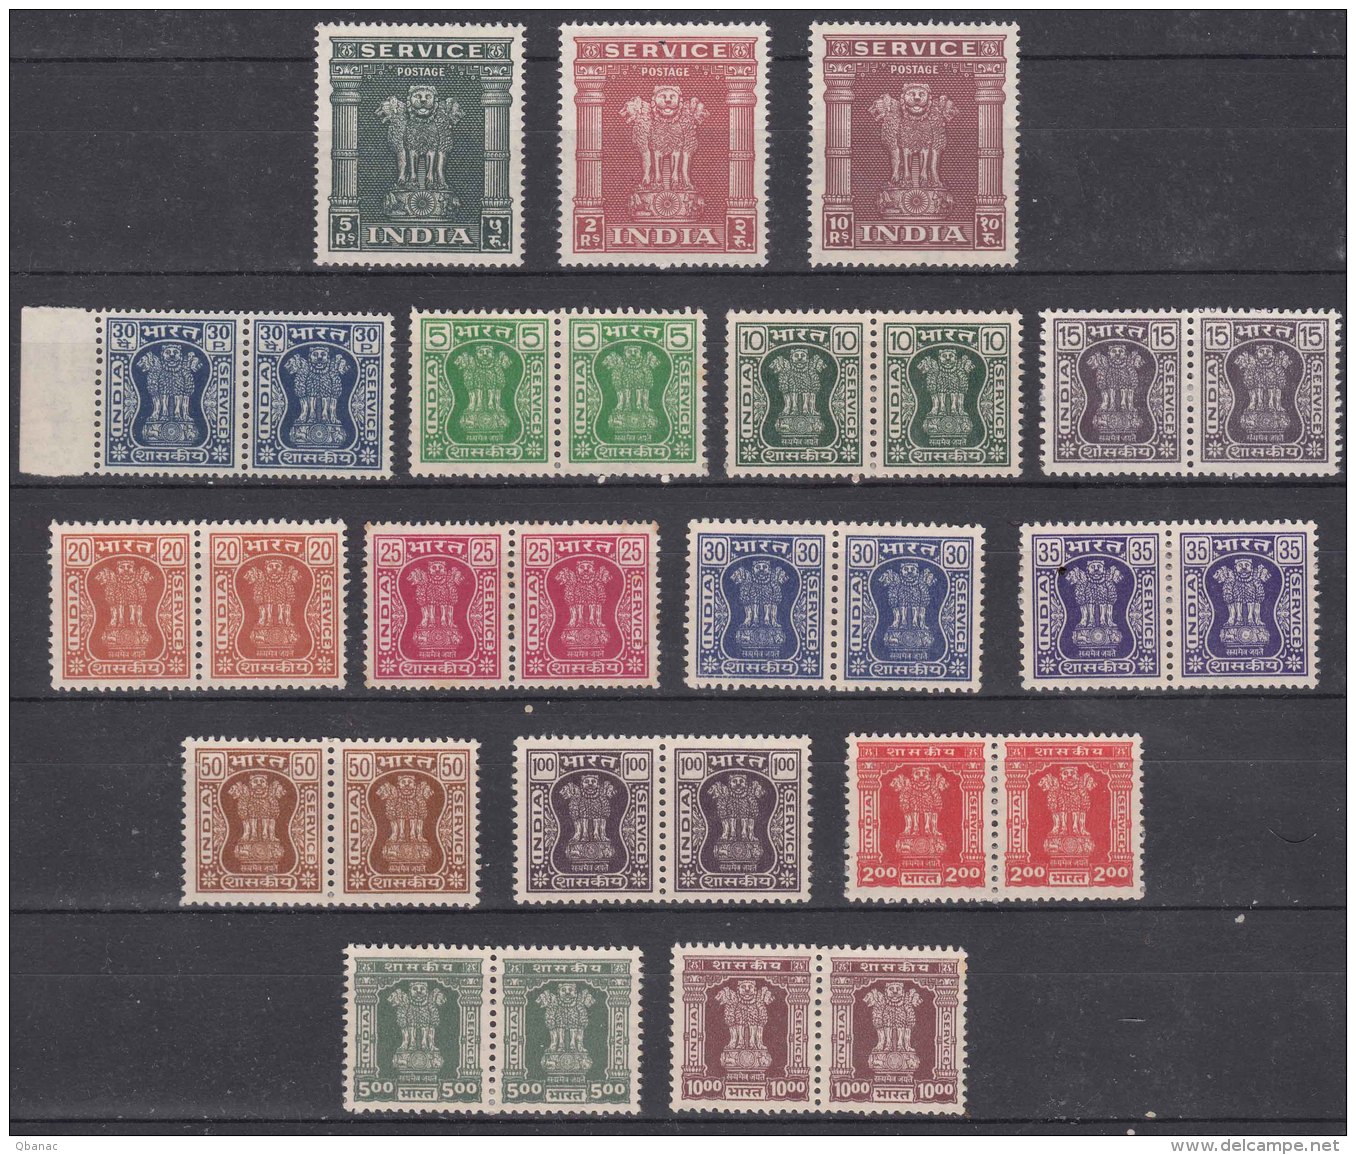 India Porto Postage Due, Dienstmarken Lot, Mixed Mint Never Hinged With Gum Or Without Gum - Official Stamps